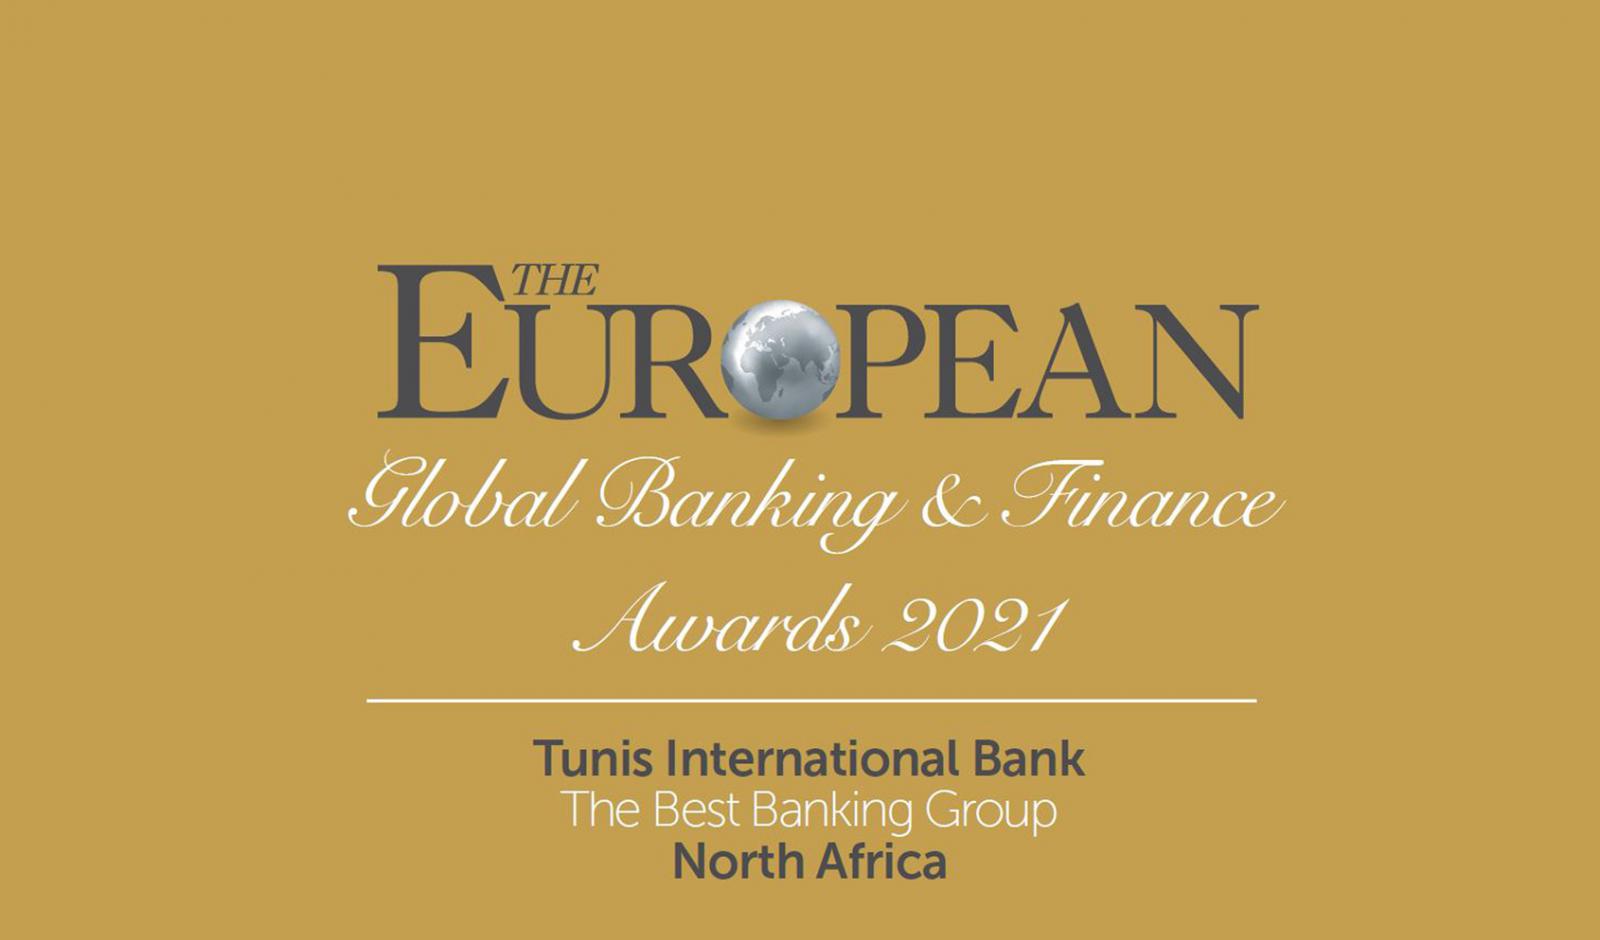 Welcome to Tunis International Bank